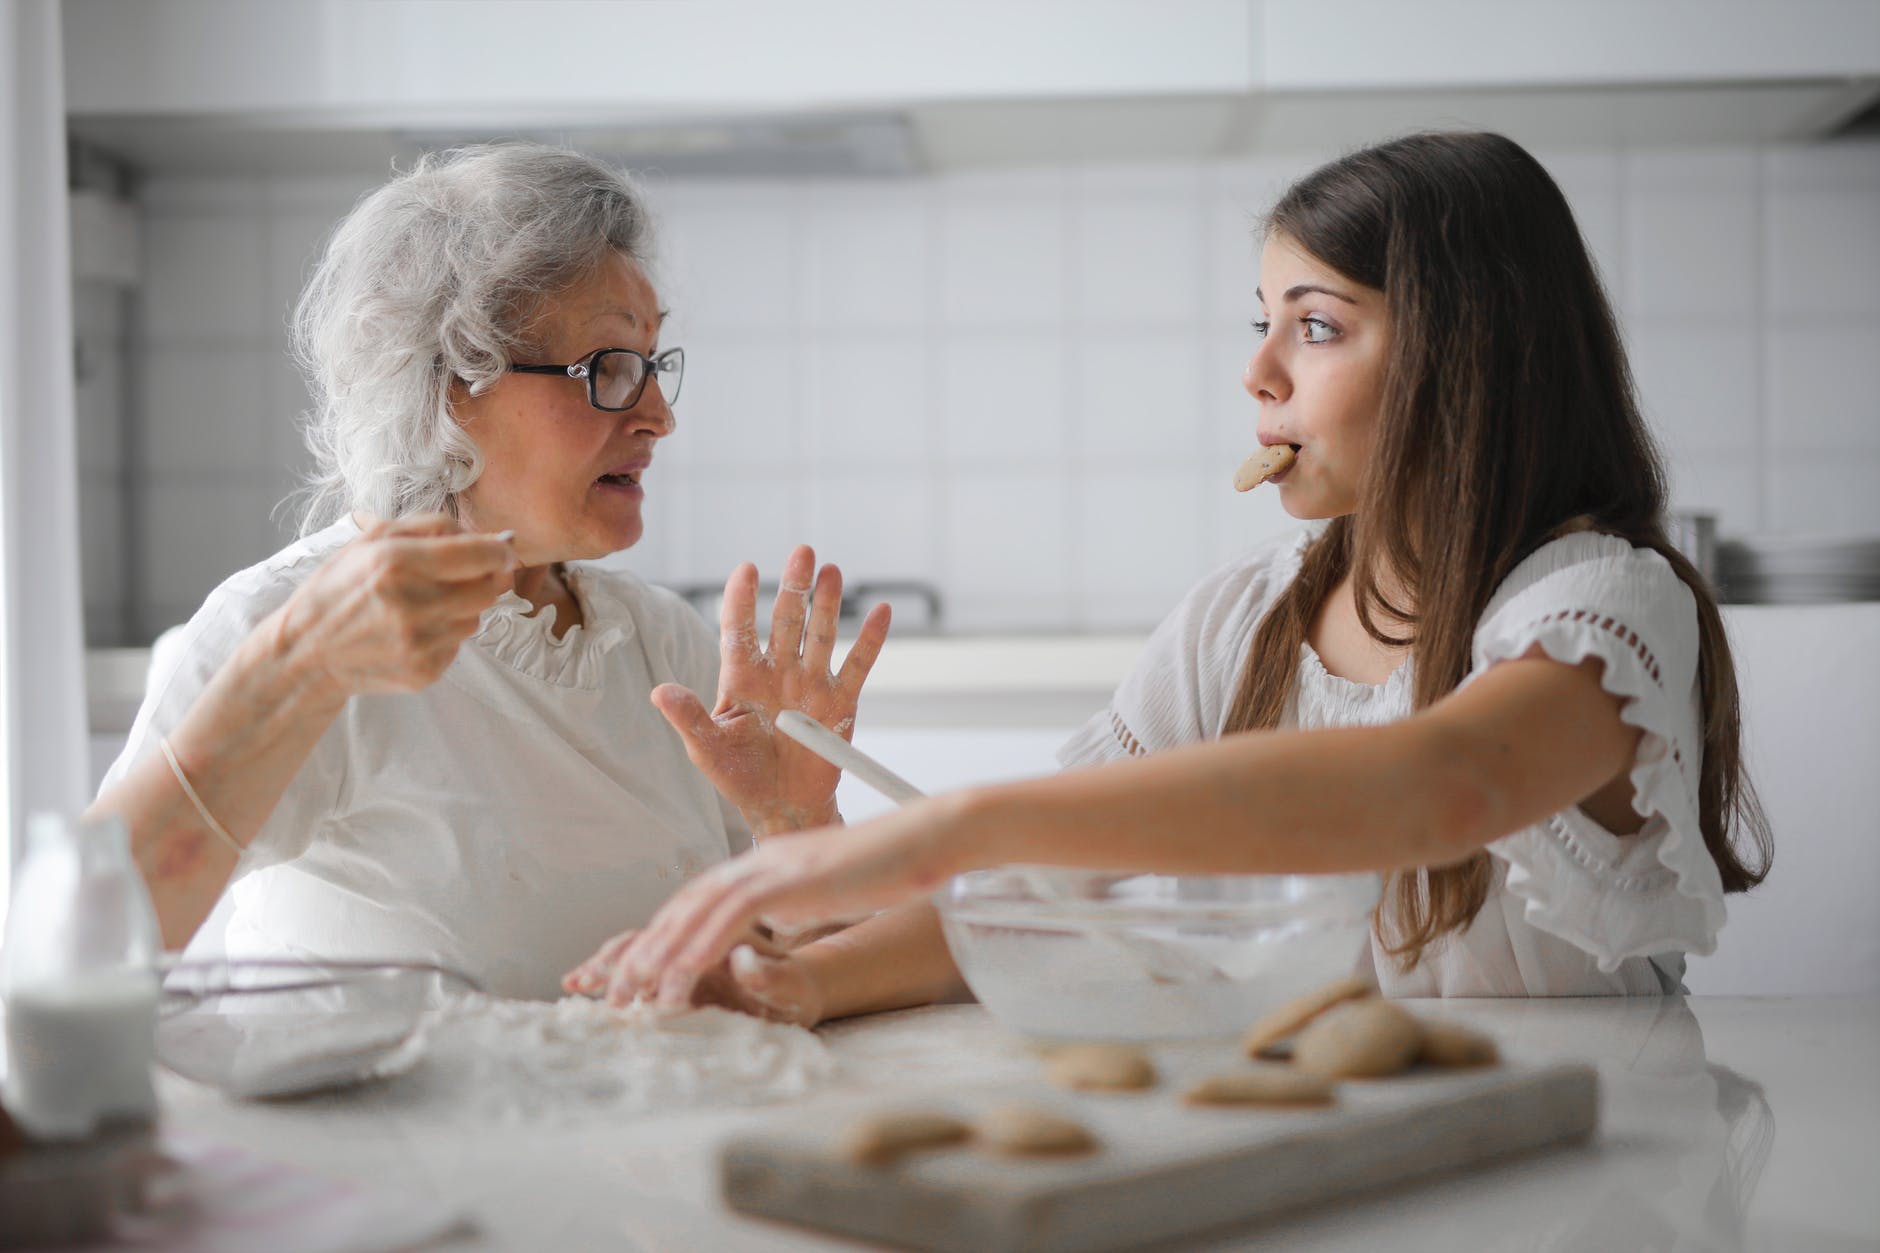 pensive grandmother with granddaughter having interesting conversation while cooking together in light modern kitchen